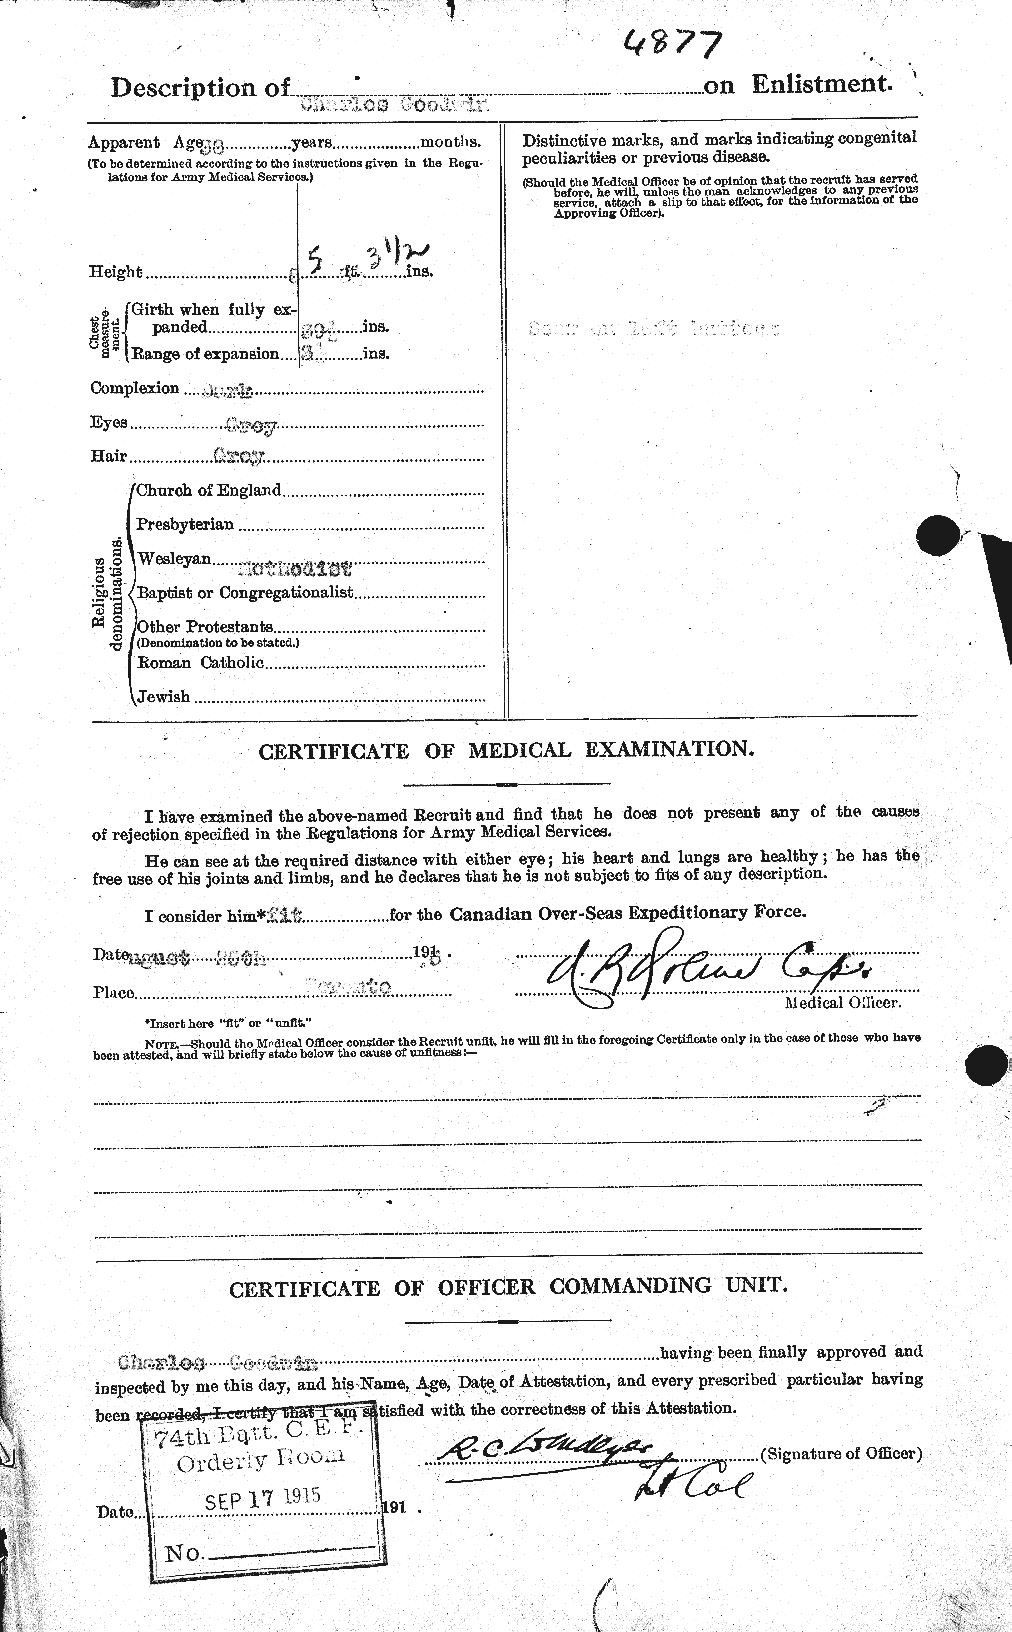 Personnel Records of the First World War - CEF 357942b